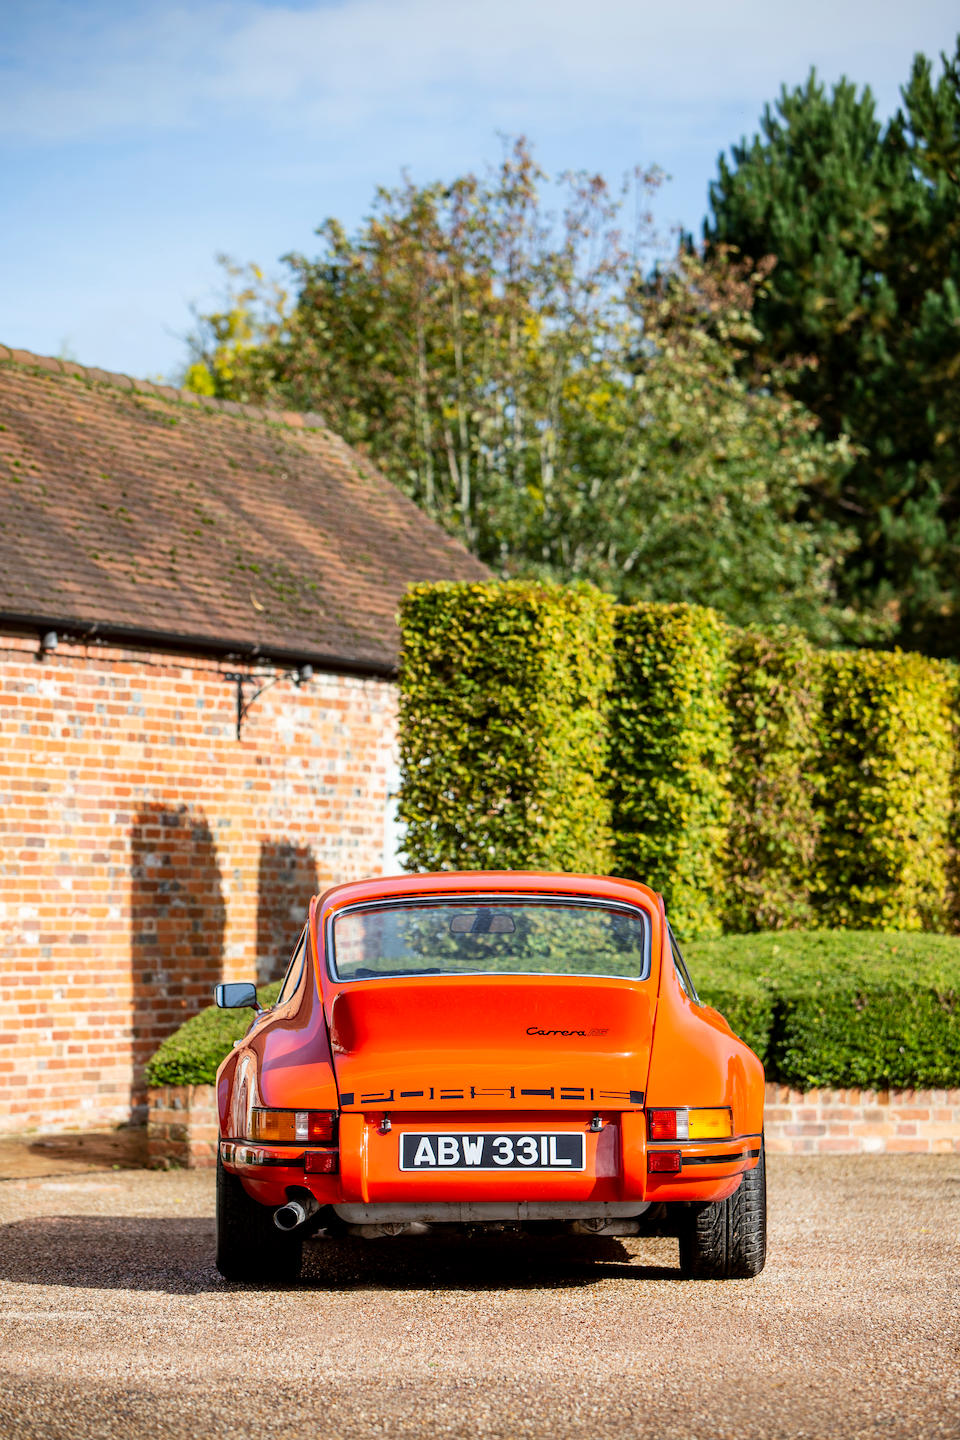 Offered from the collection of Jay Kay. One of only 200 examples built,1973 Porsche 911 Carrera RS 2.7-Litre 'Lightweight' Coup&#233;  Chassis no. 9113601097